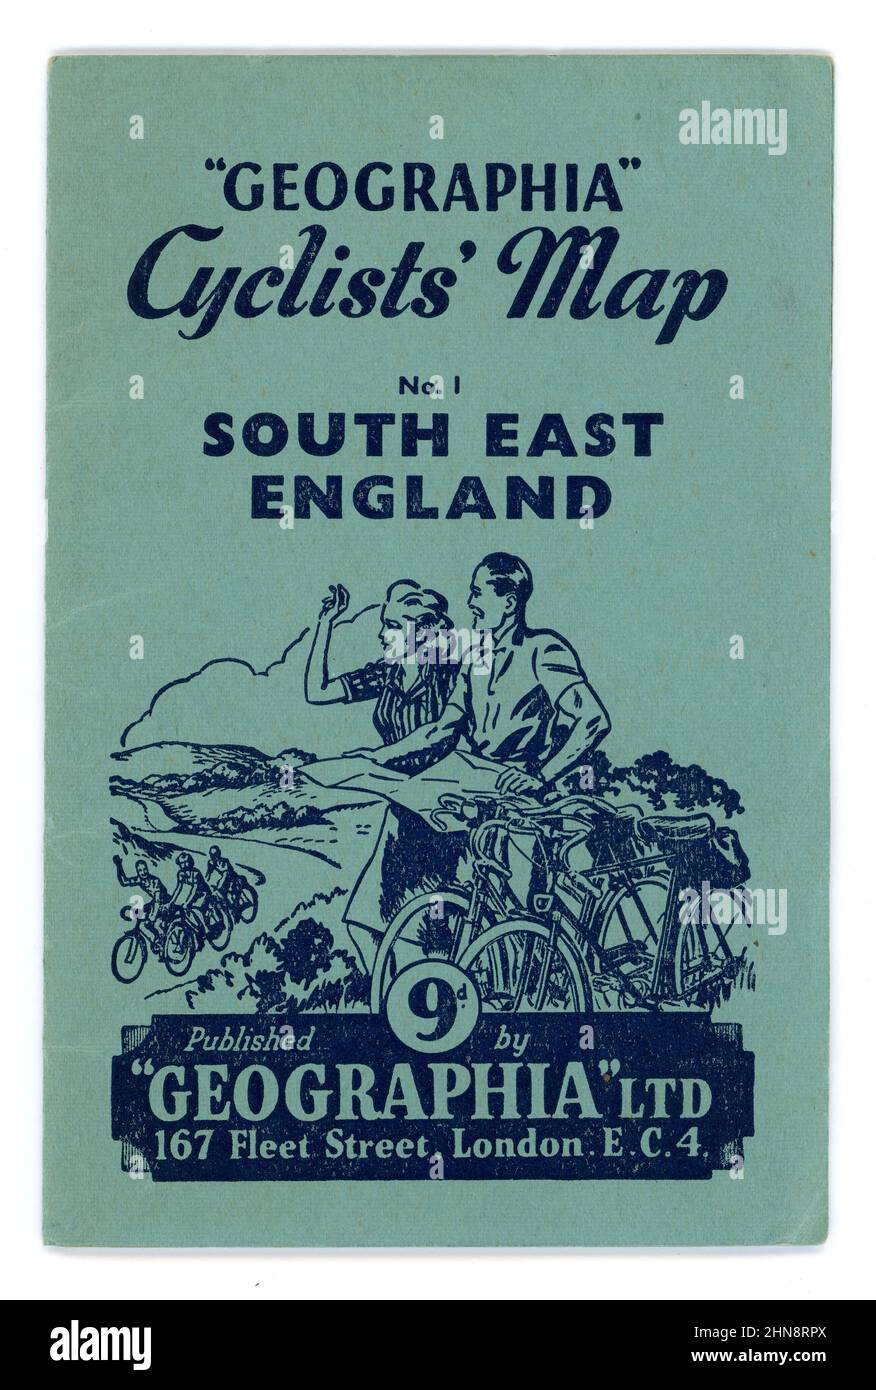 Original 1940's Geographia series Cyclists' Map South East England, . Issue No. 1. Published by Geographia Ltd. 167 Fleet Street, London, EC4. The illustration shows a happy couple out enjoying themselves cycling in the countryside, map reading, waving to another cycling group, circa 1945 / 1946 Stock Photo